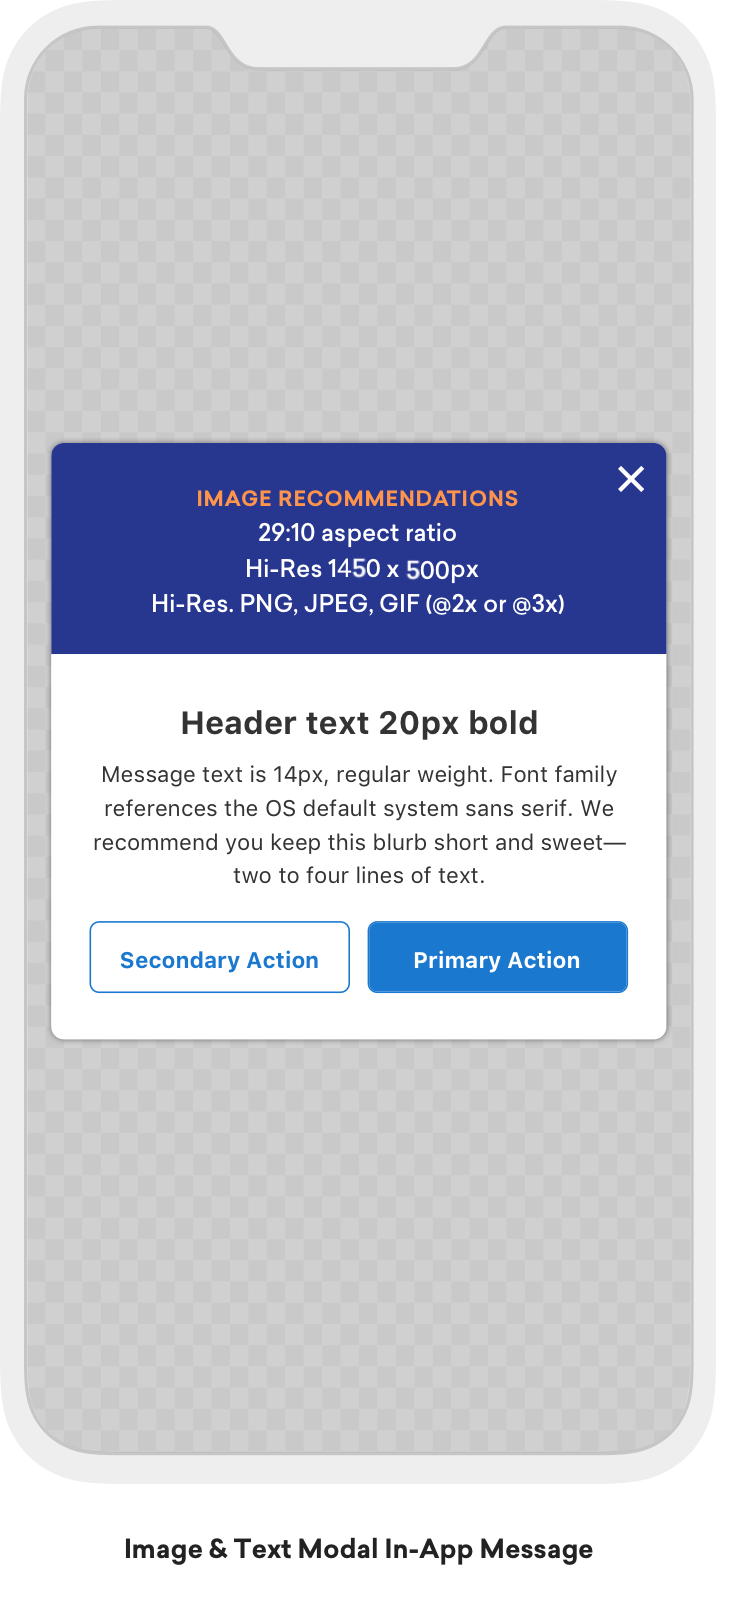 A modal in-app message in the center of a phone screen.